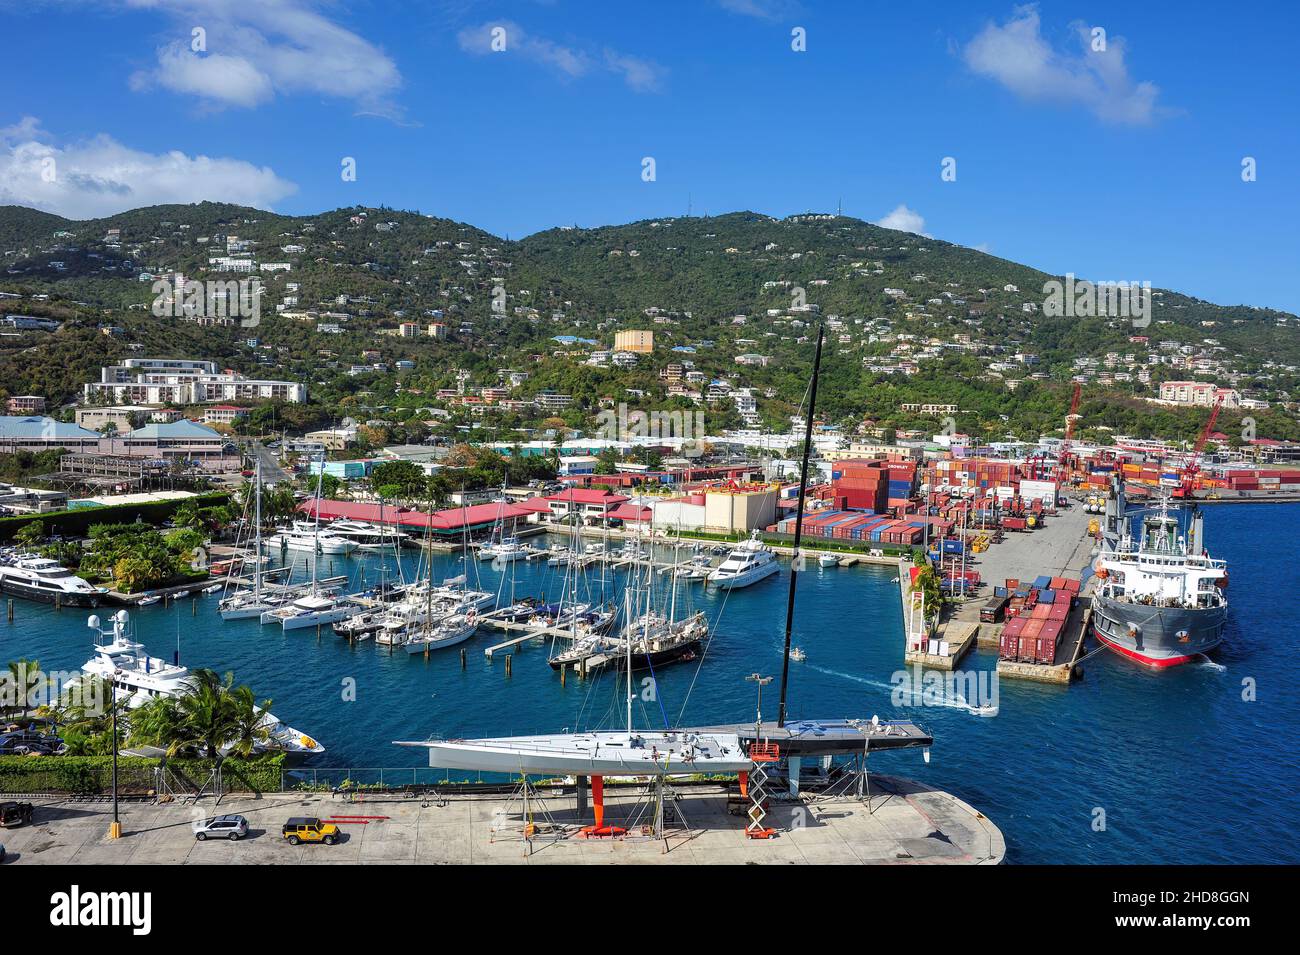 Aerial view of Marina and shipping dock near Crown Bay, St. Thomas, US Virgin Islands on a sunny day Stock Photo